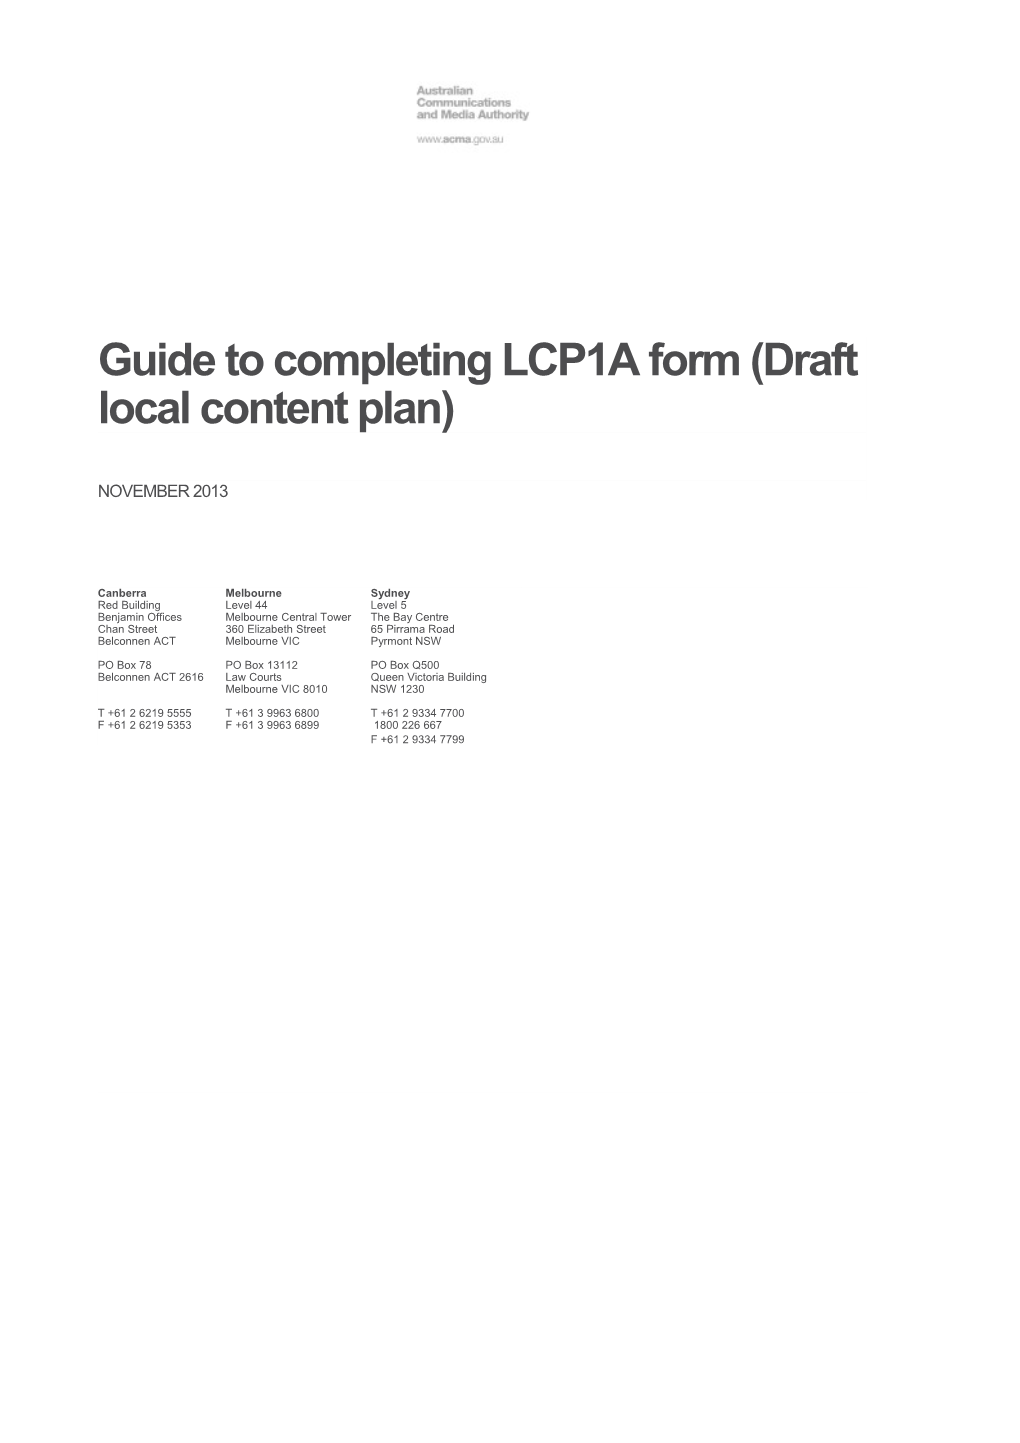 Guide to Completing LCP1A Form (Draft Local Content Plan)